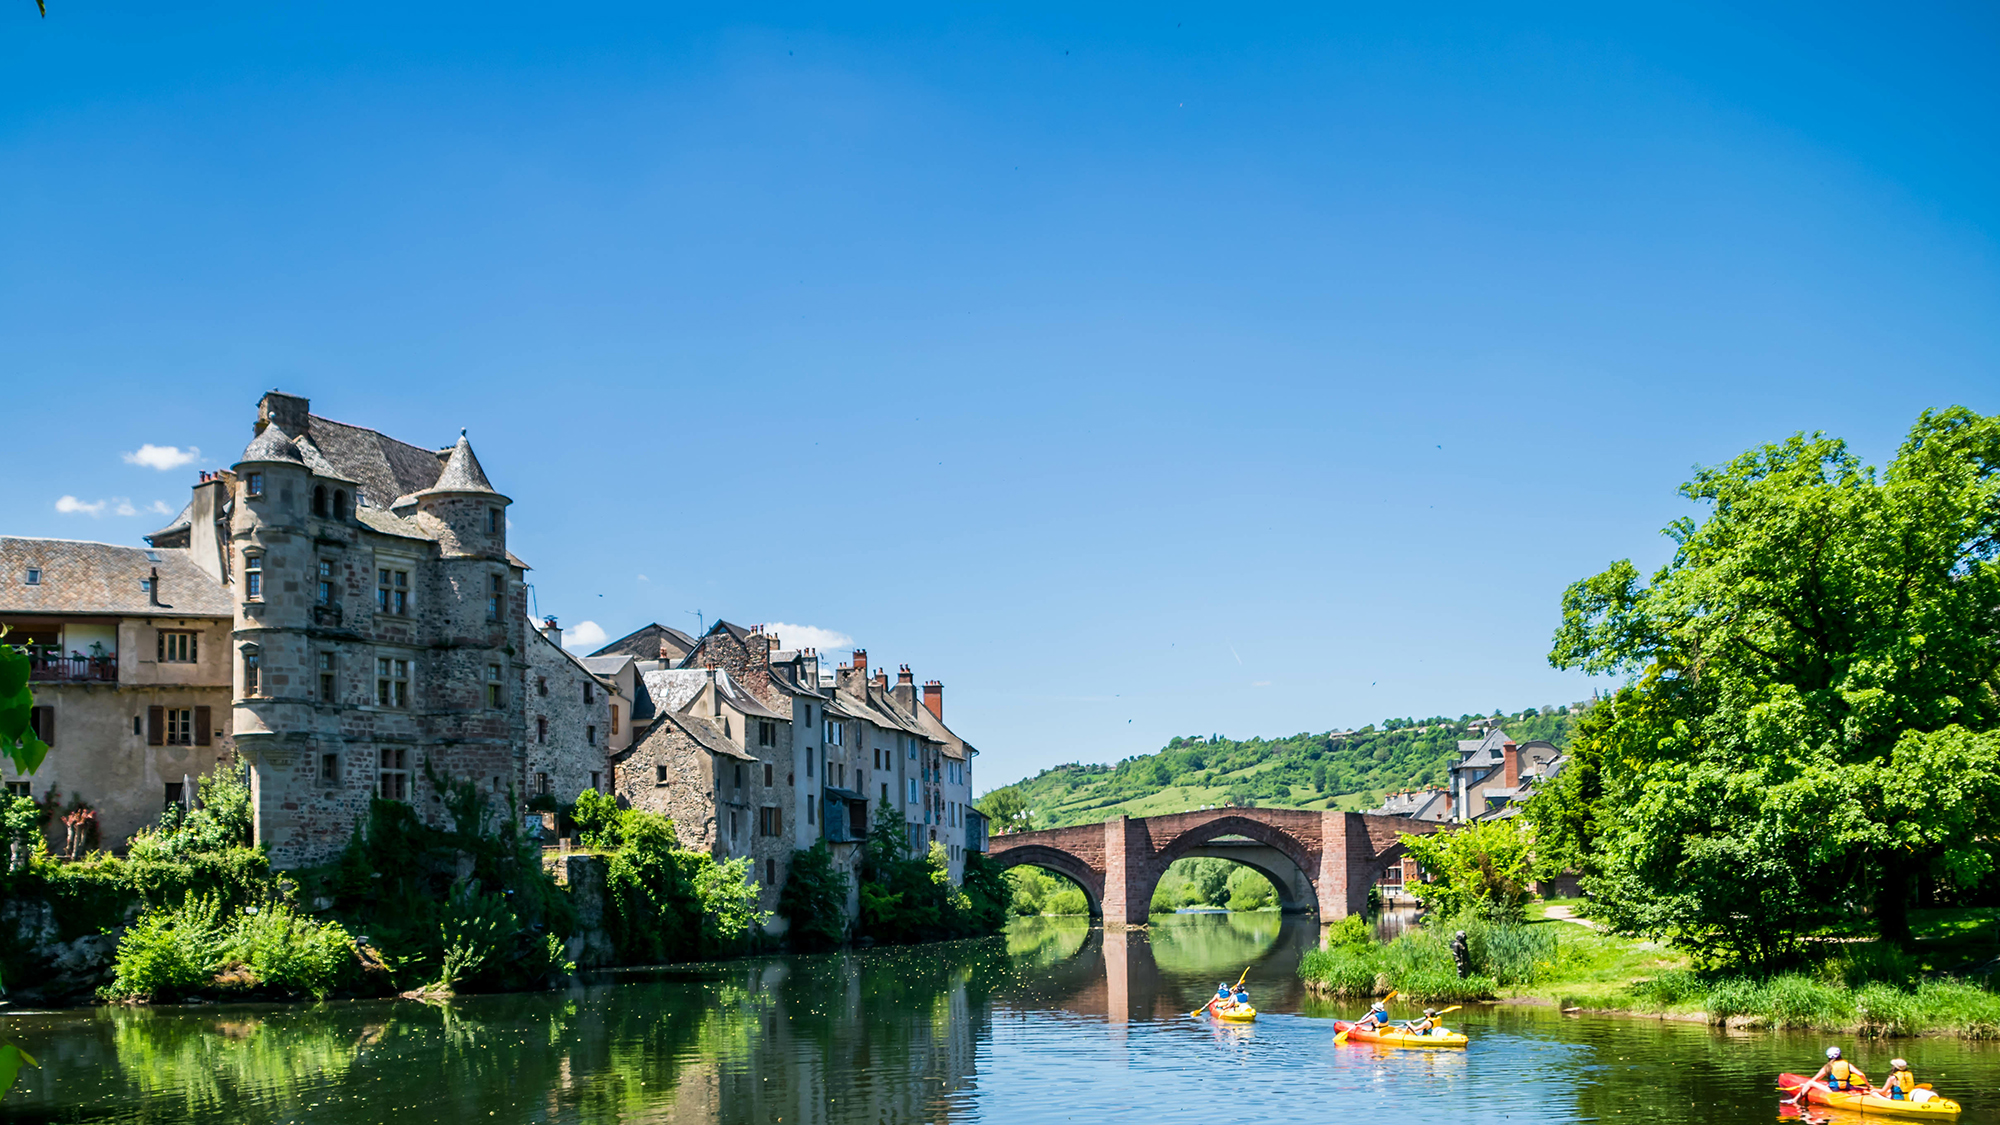 stunning French town along a riverbank with boats going along and under a bridge